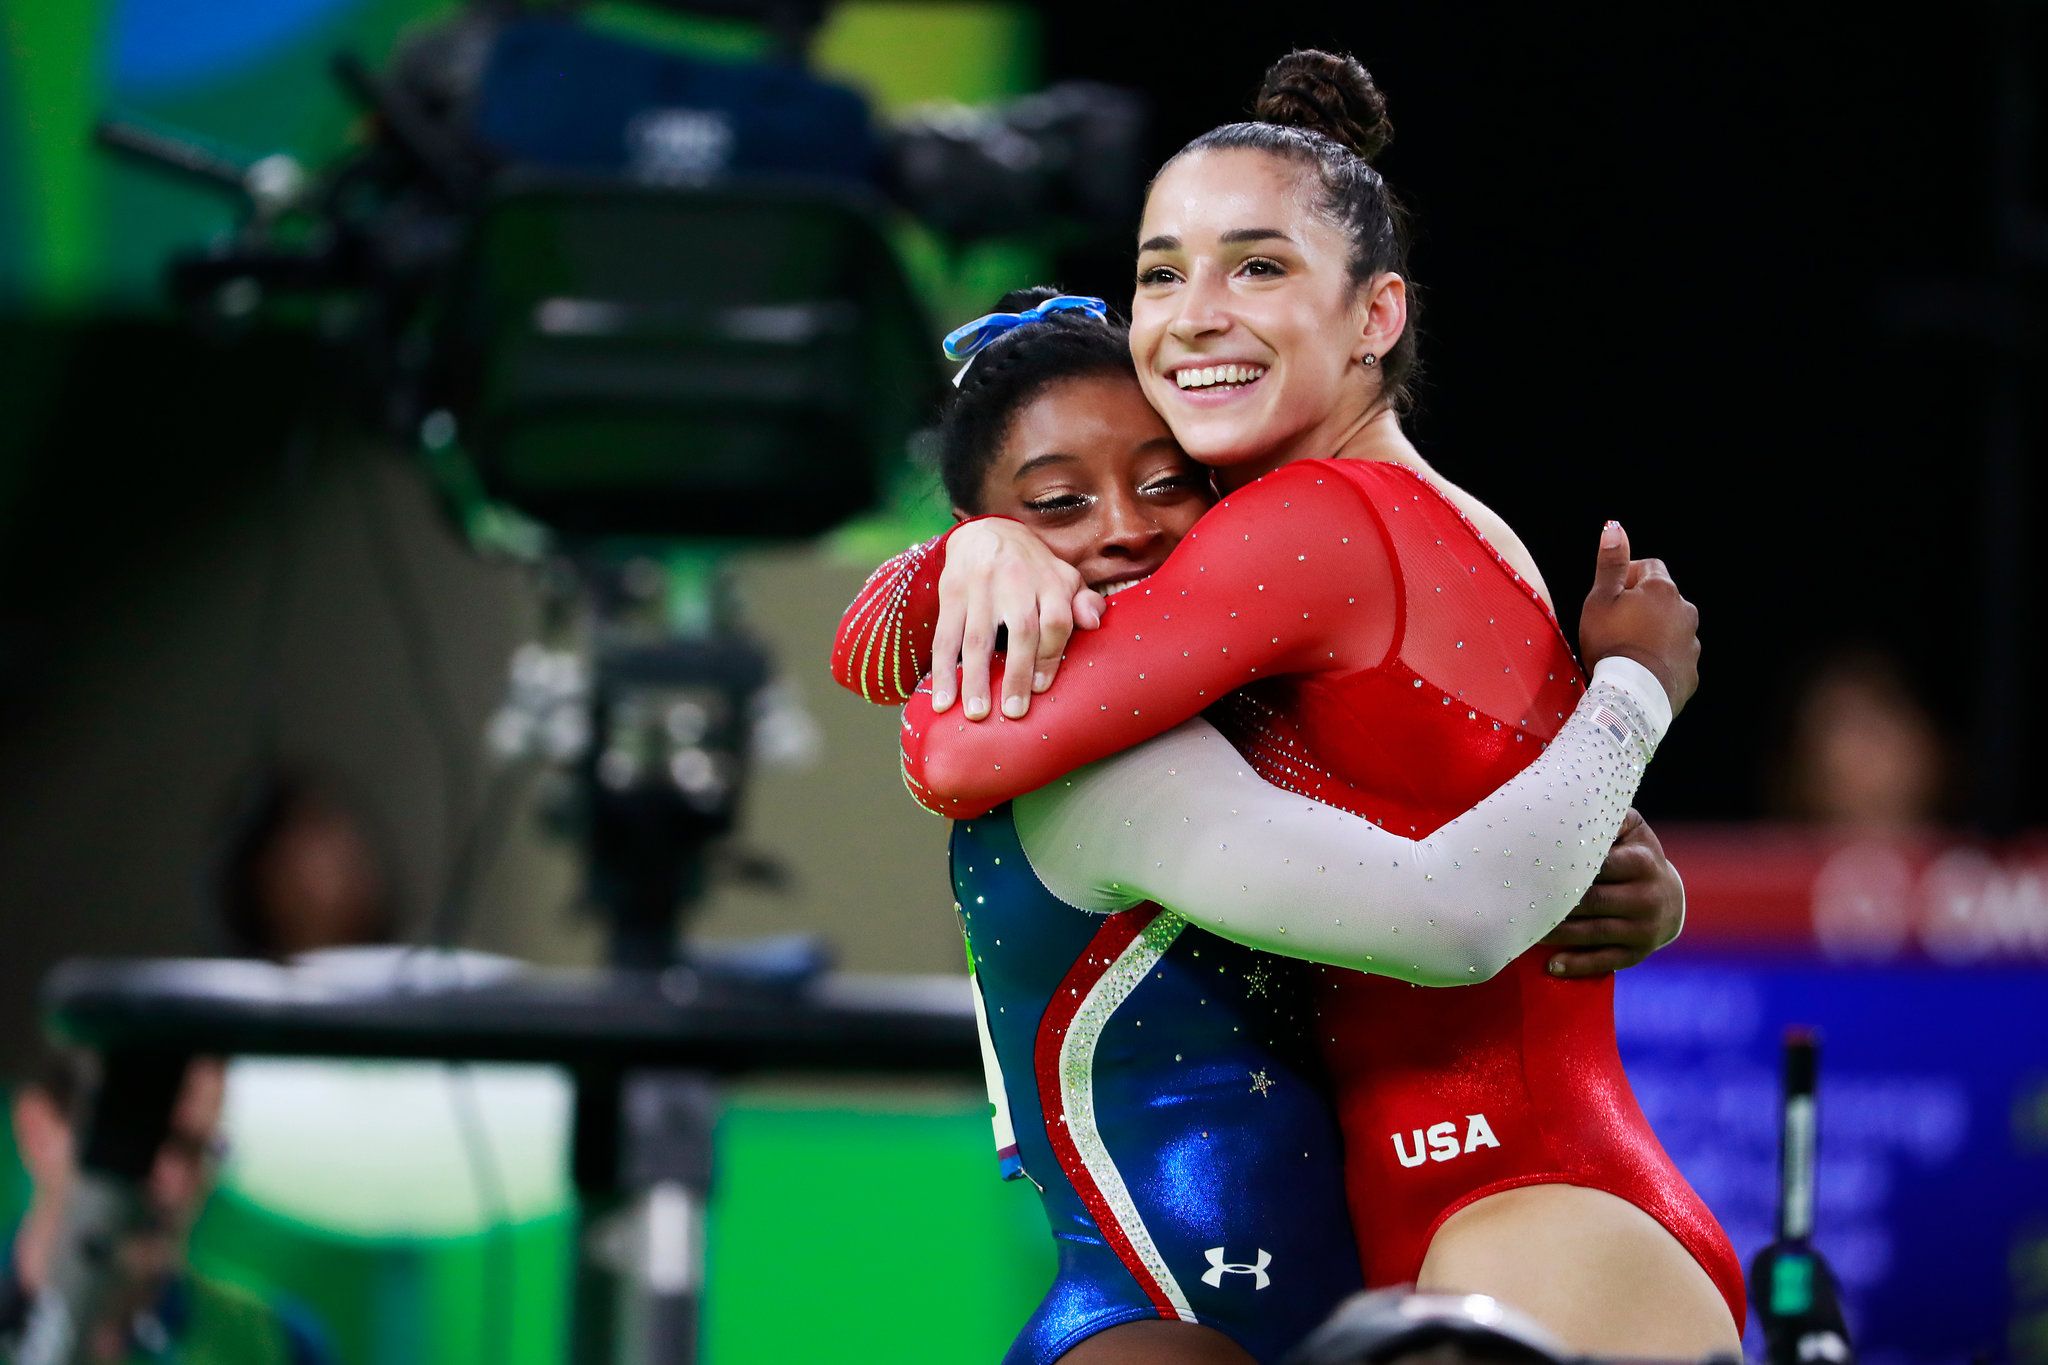 It's Official: Simone Biles Is the World's Best Gymnast